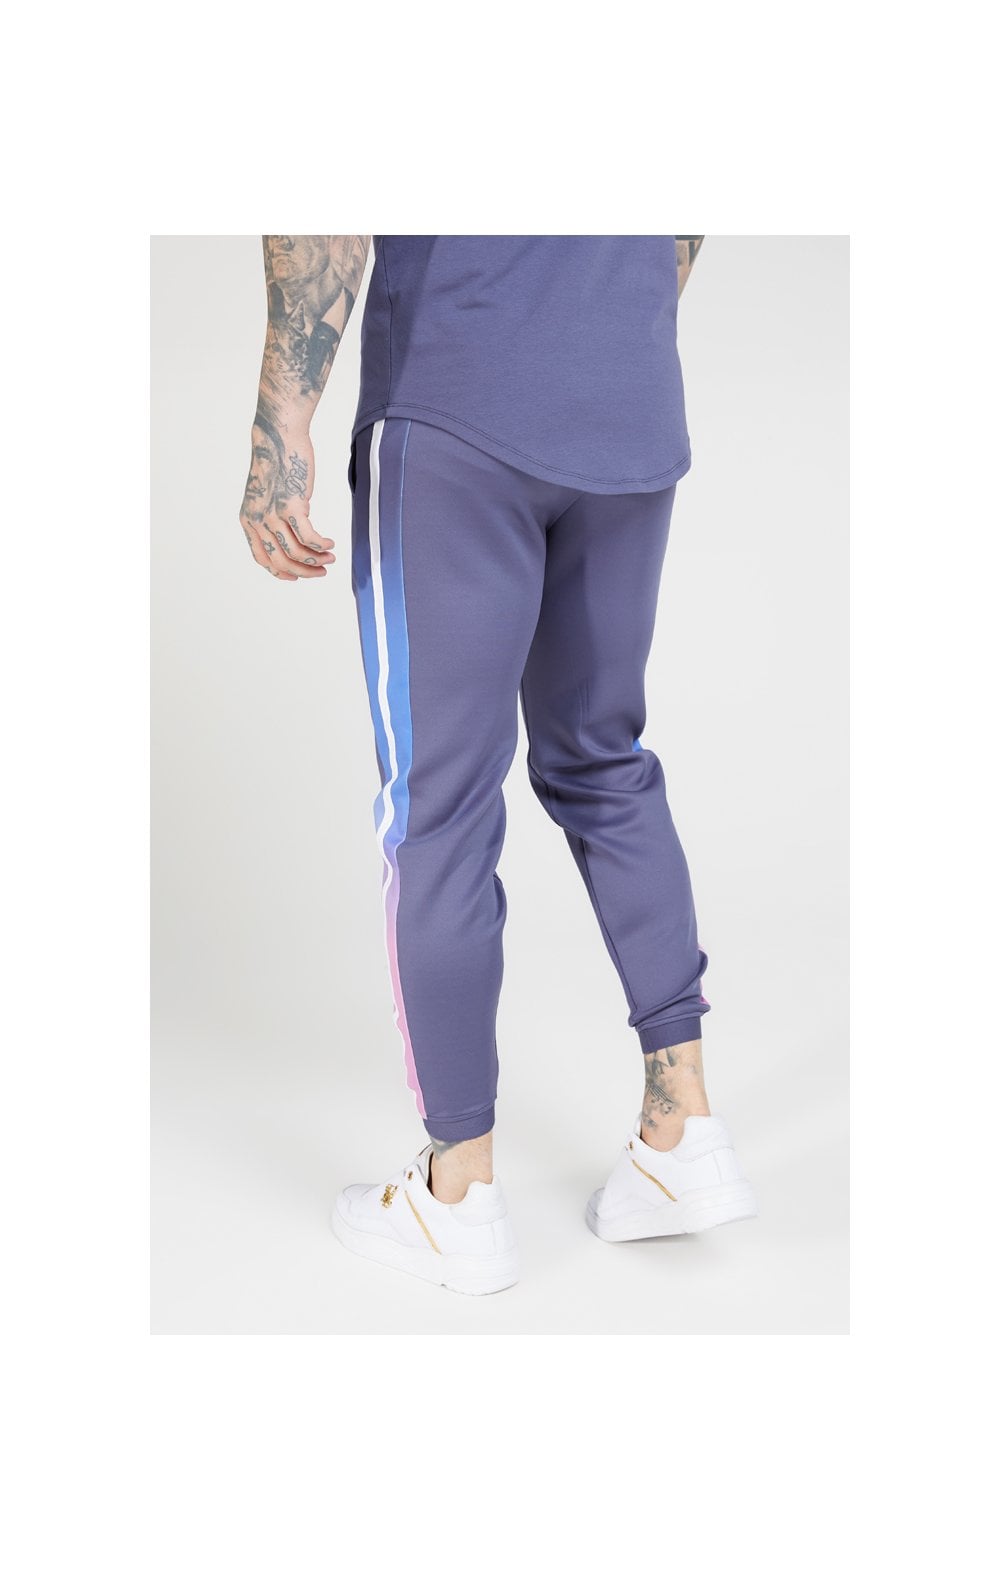 Load image into Gallery viewer, SikSilk Fitted Fade Cuffed Pants – Tri-Neon Fade (2)